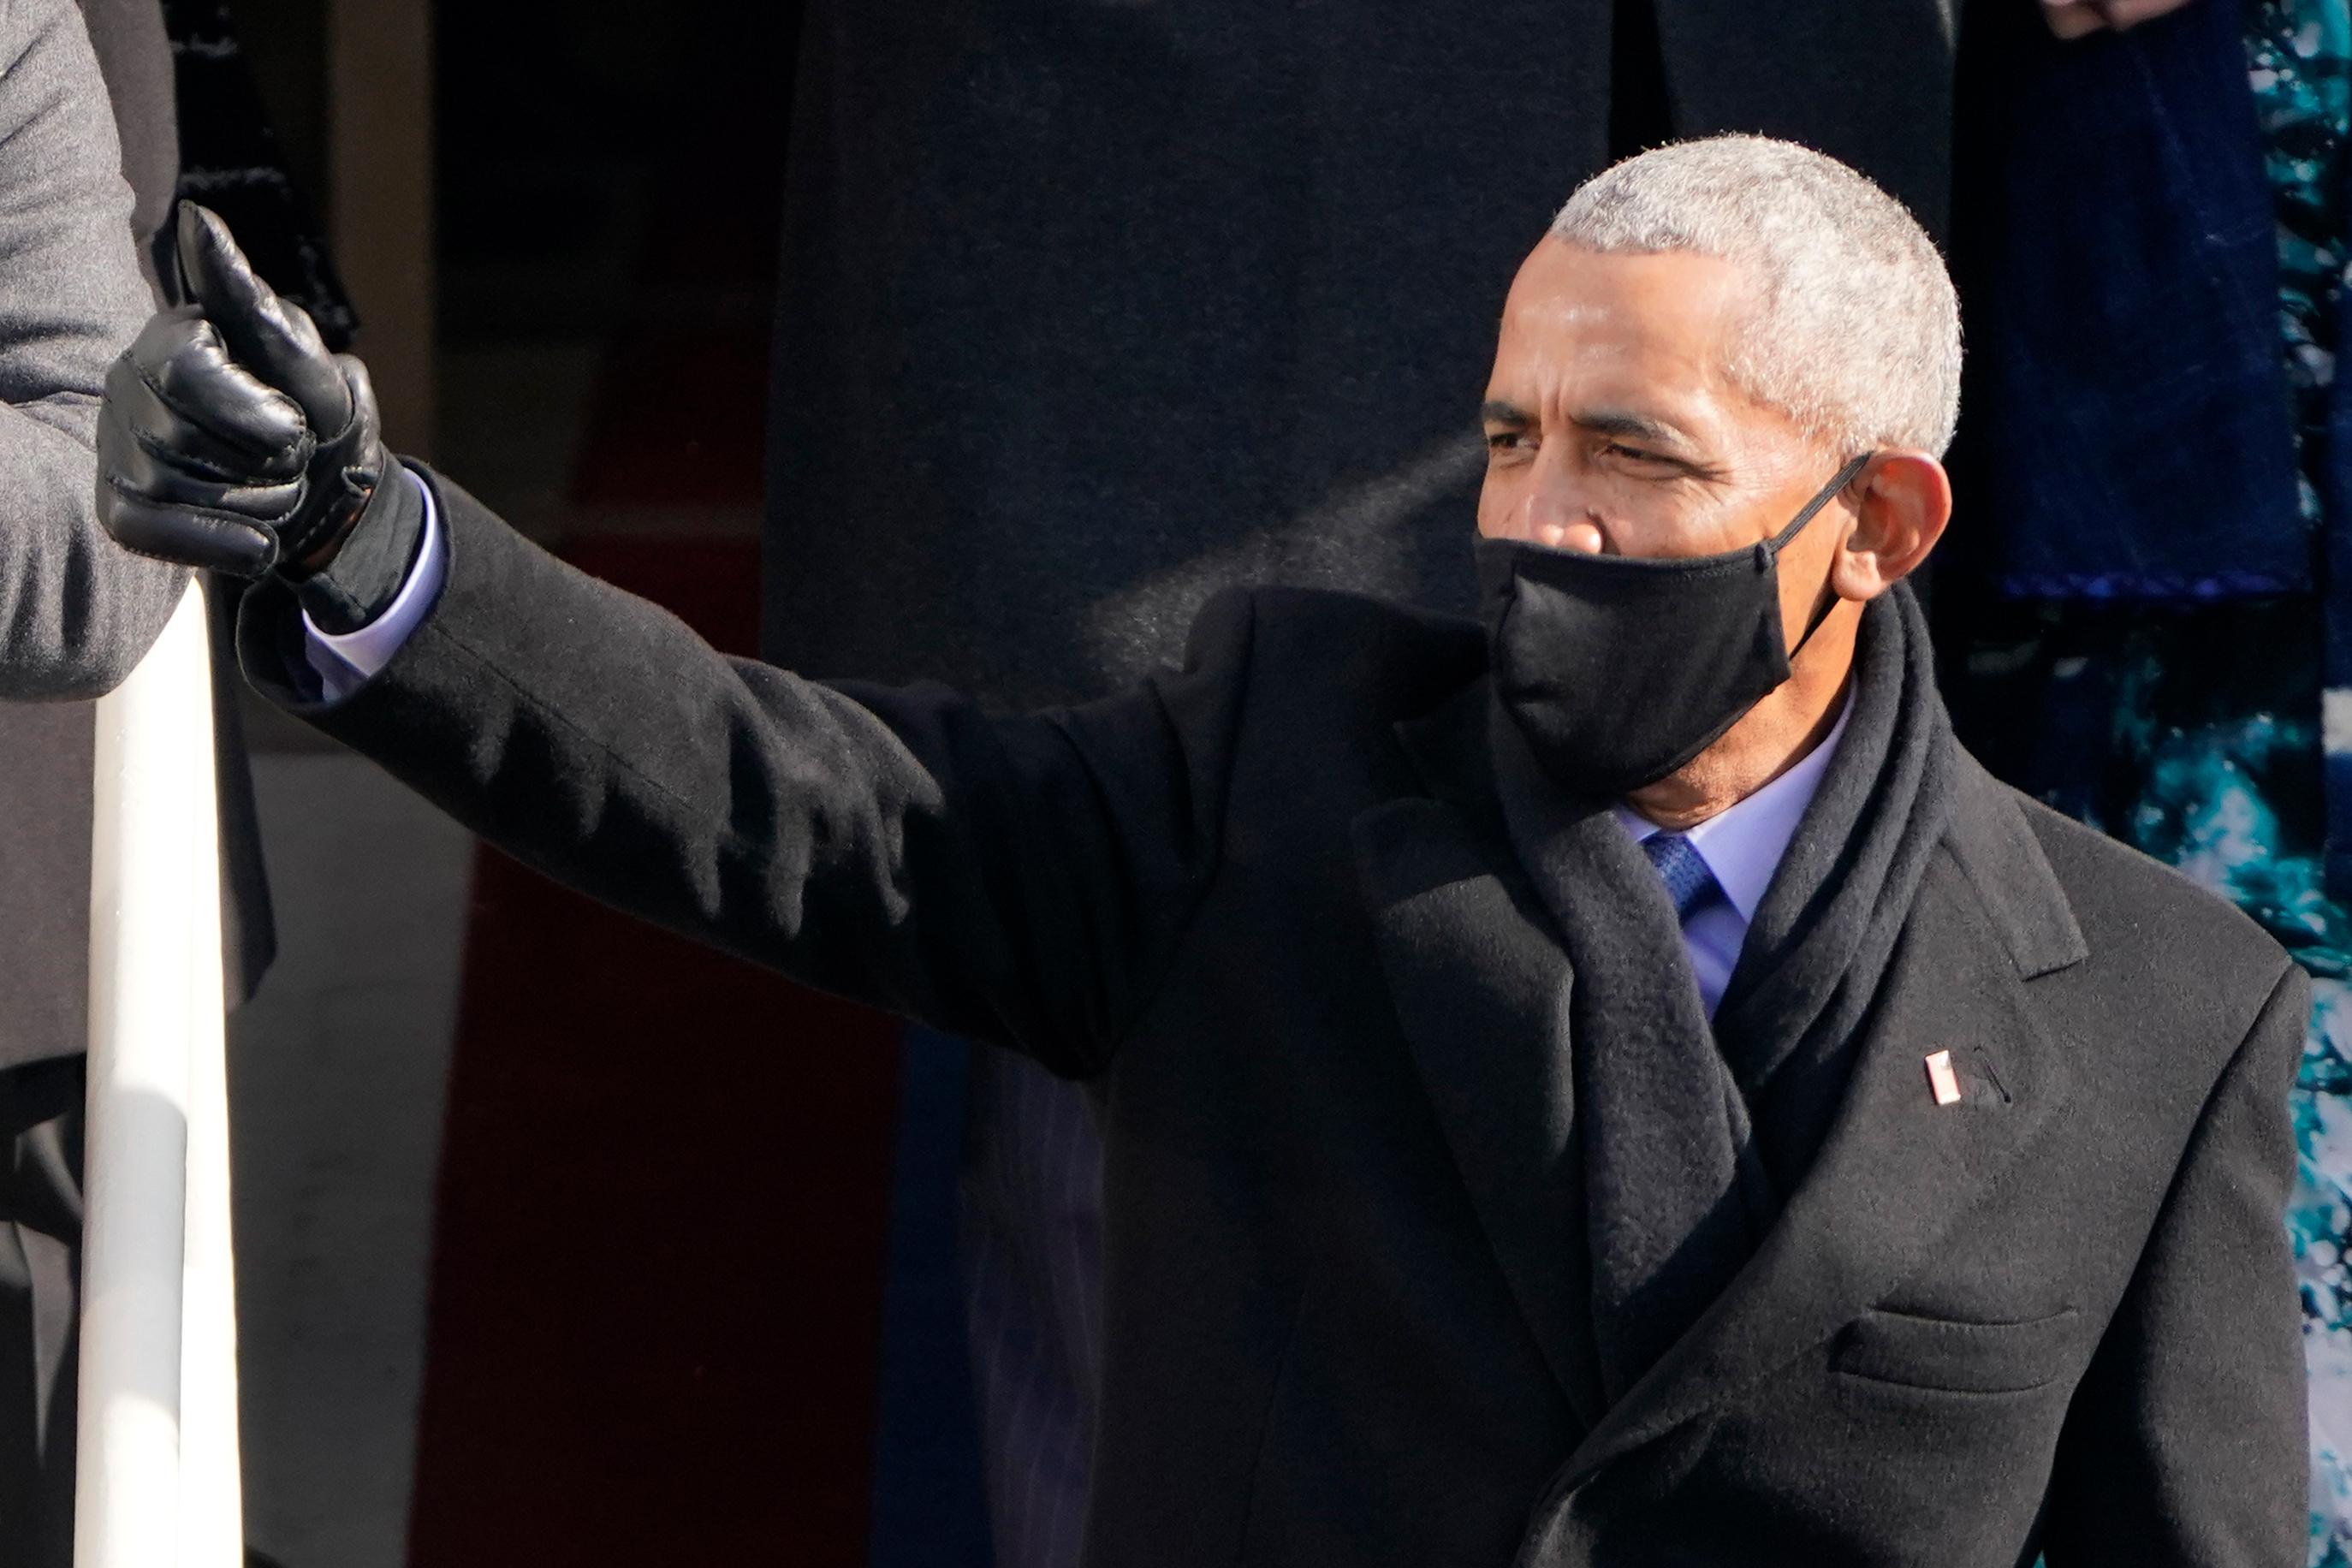 Obama wears a face mask and flashes a thumbs-up.